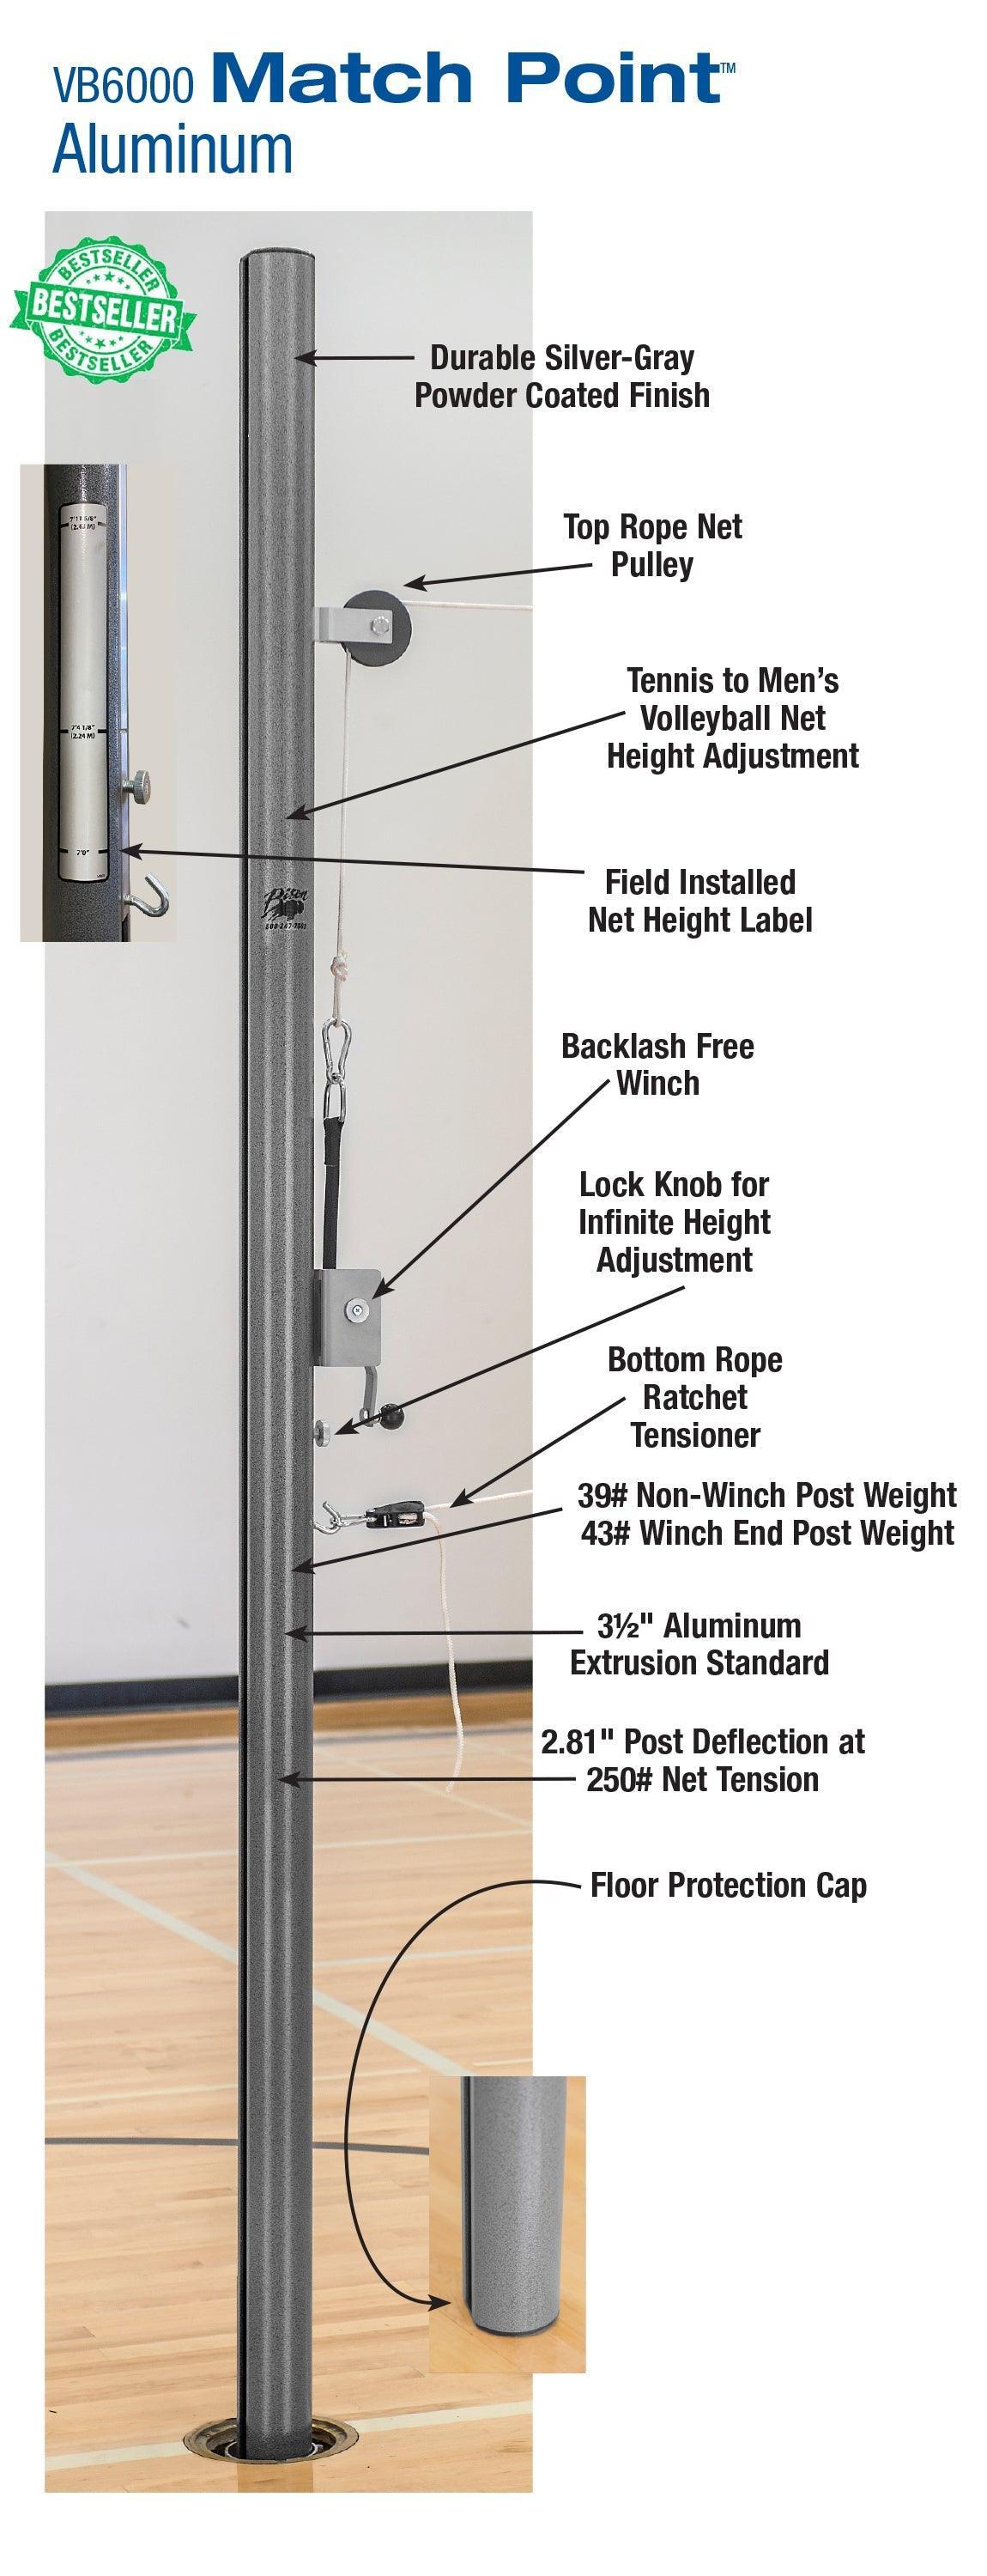 Match Point Aluminum Complete System without Sockets - bisoninc